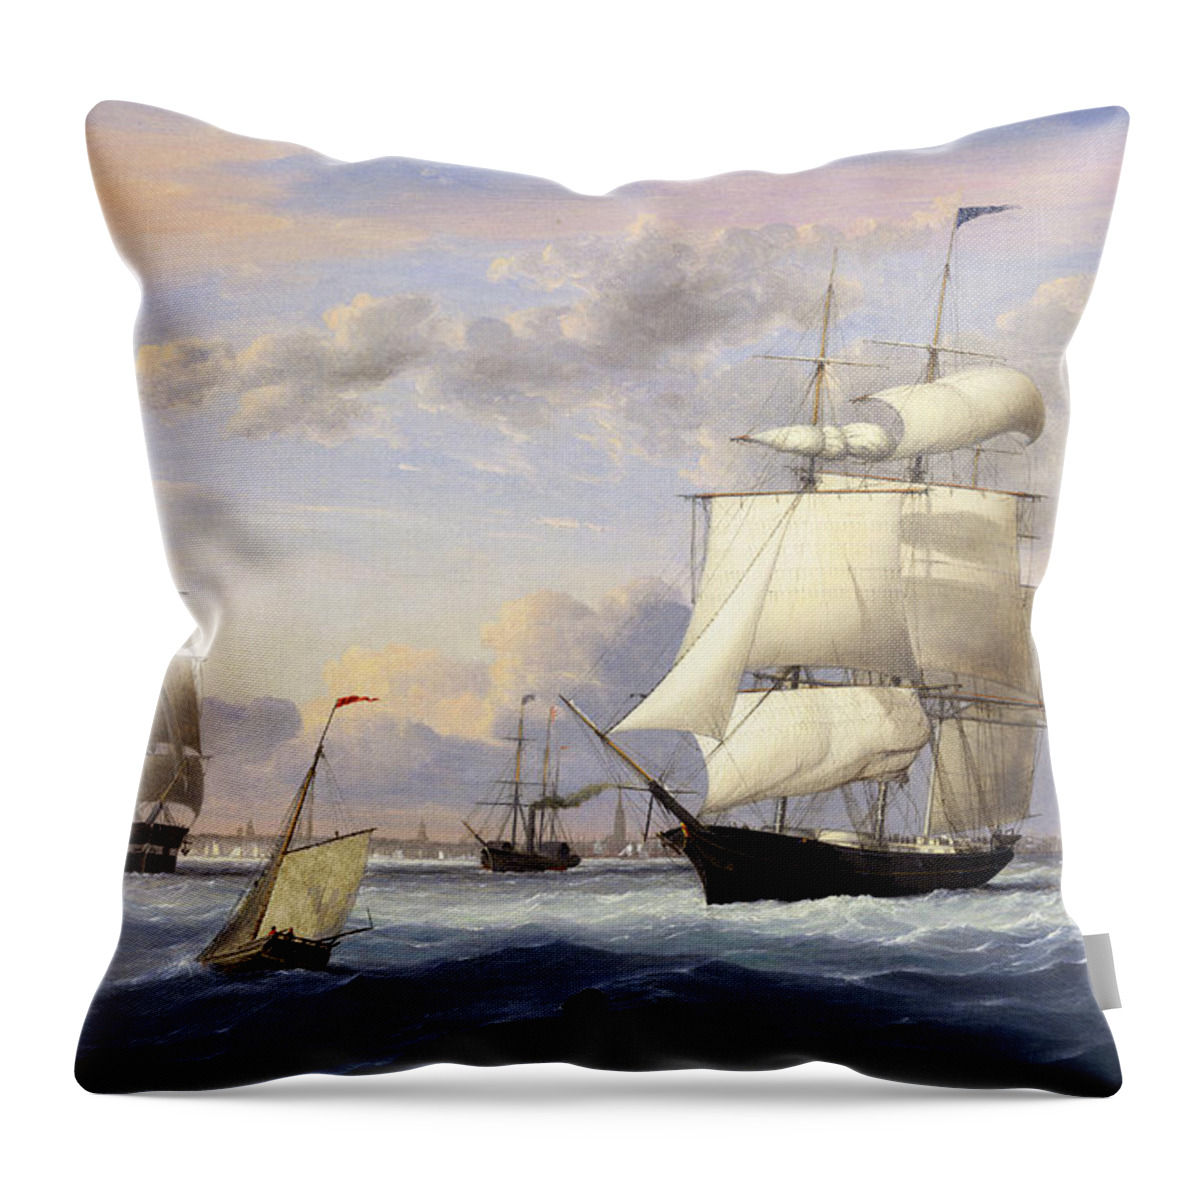 New York Harbor Throw Pillow featuring the painting New York Harbor by Fitz Henry Lane by Rolando Burbon